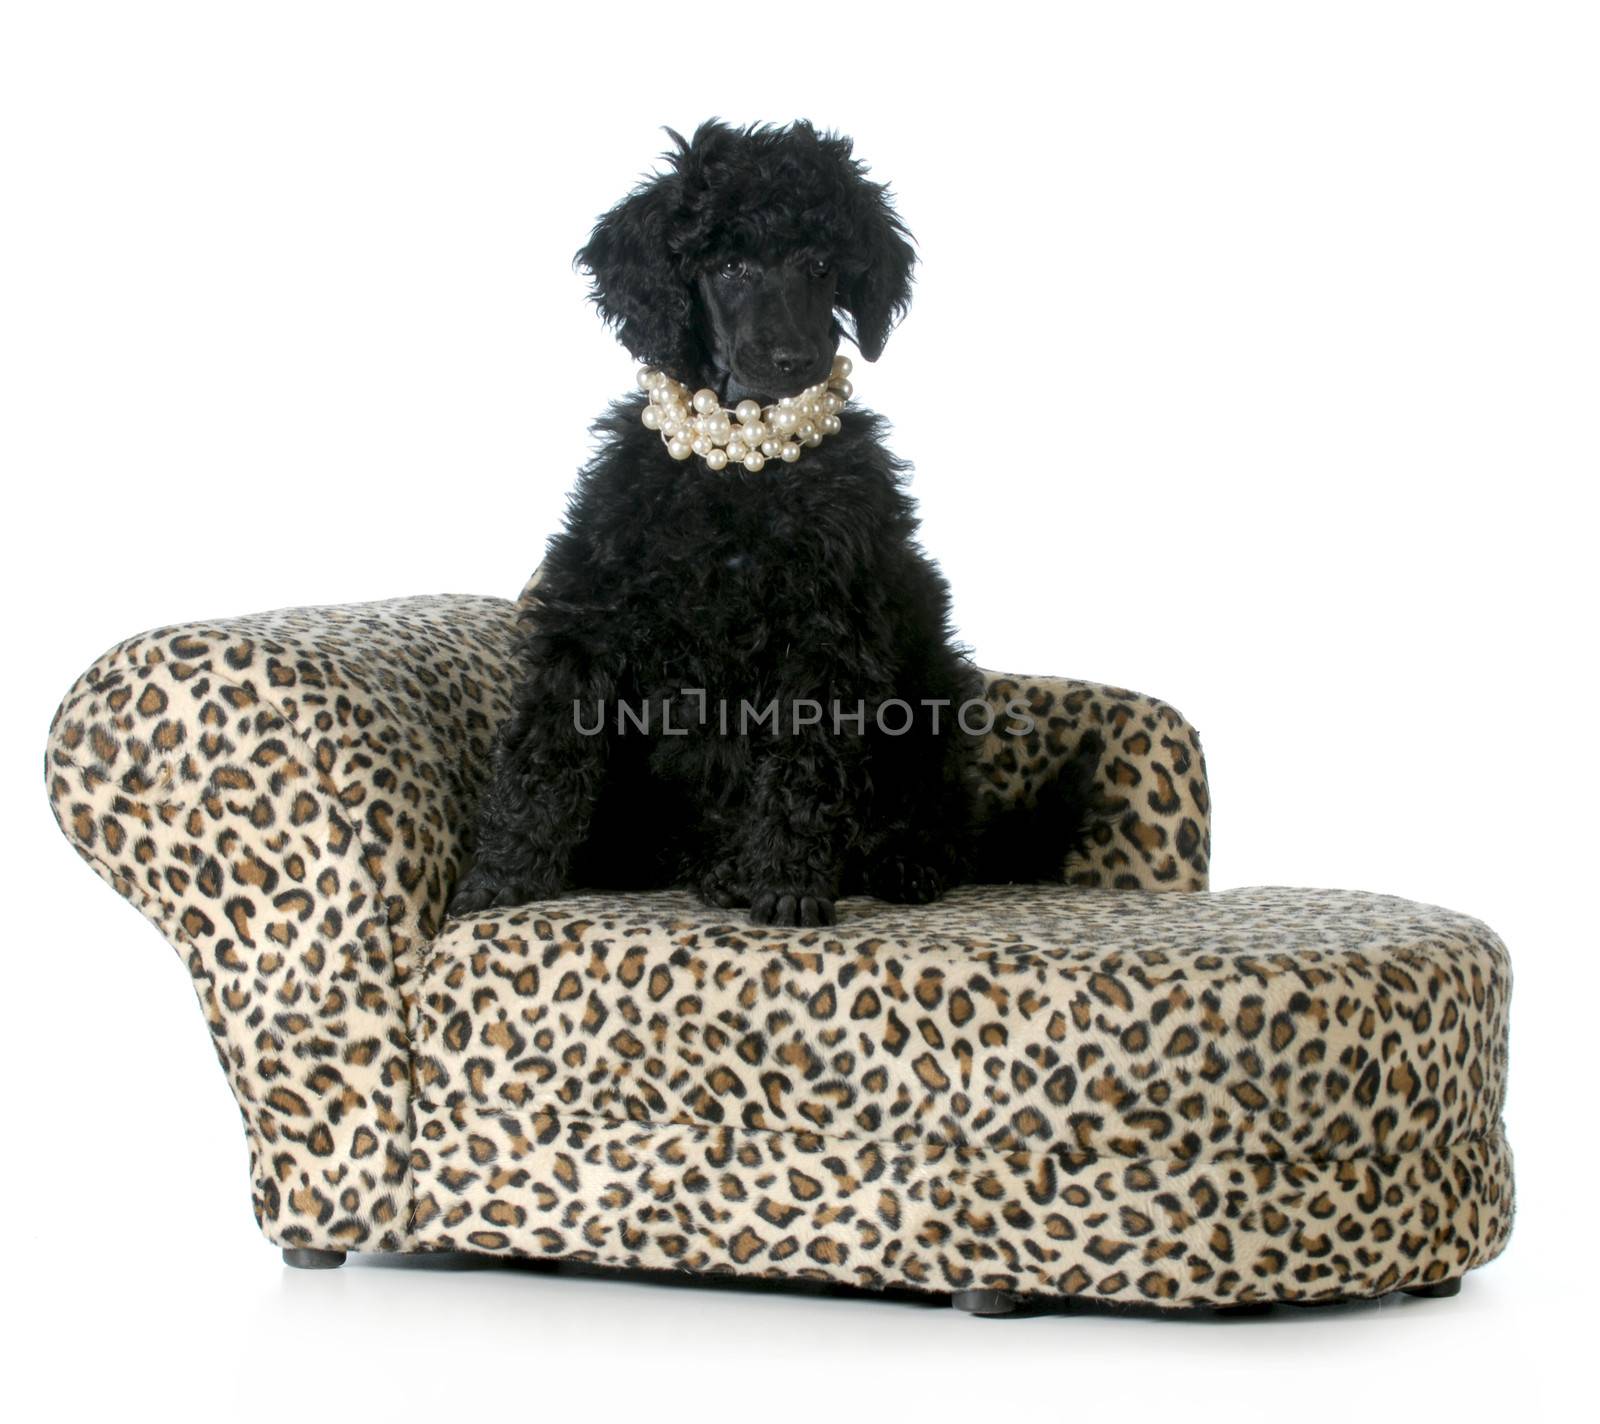 female poodle puppy sitting on a dog couch isolated on white background - 8 weeks old